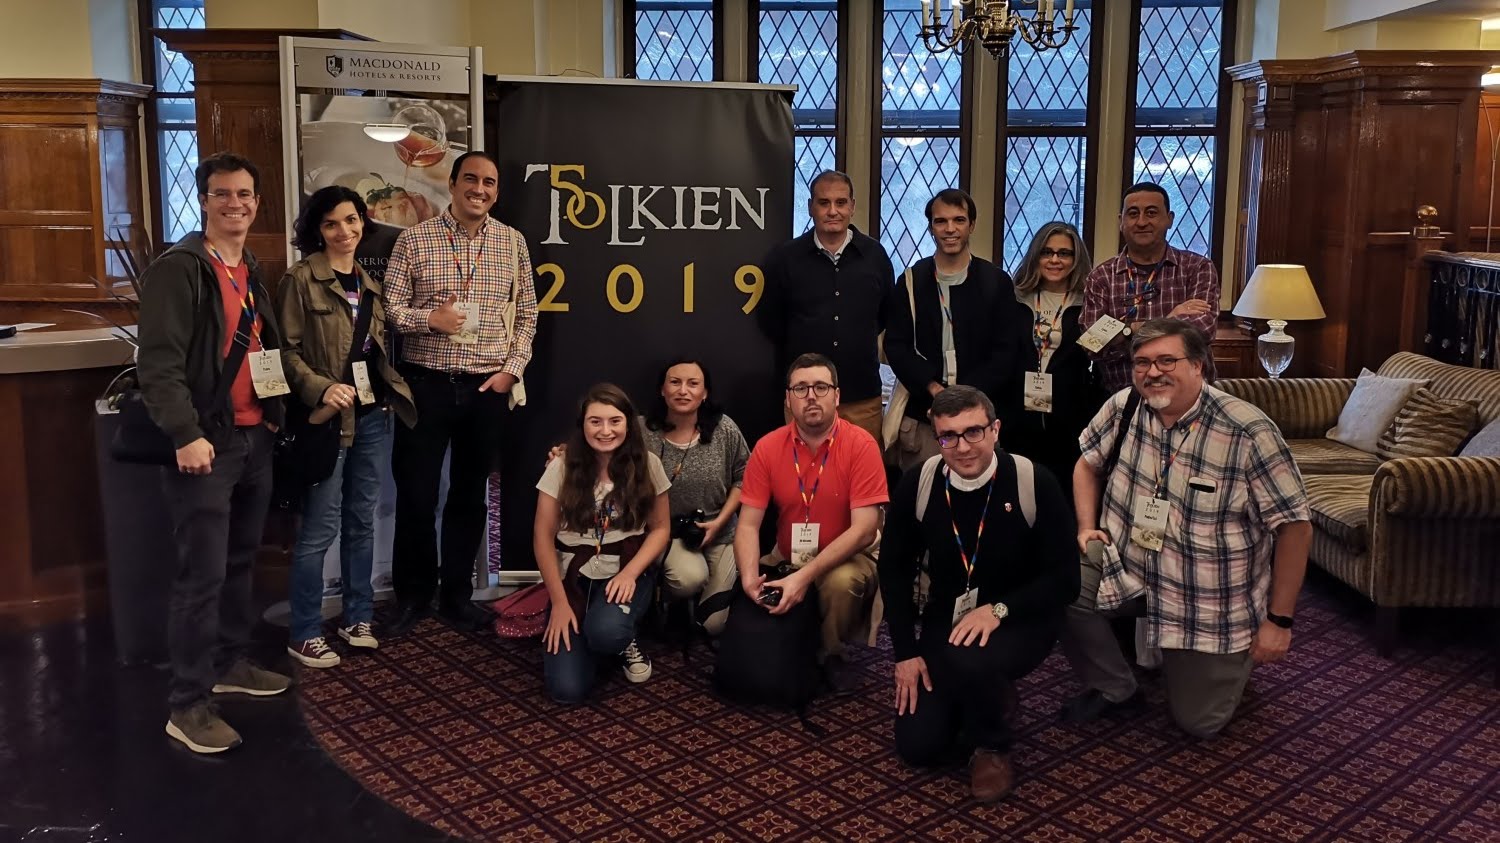 The STE delegation with other friends from Spain also attending Tolkien 2019